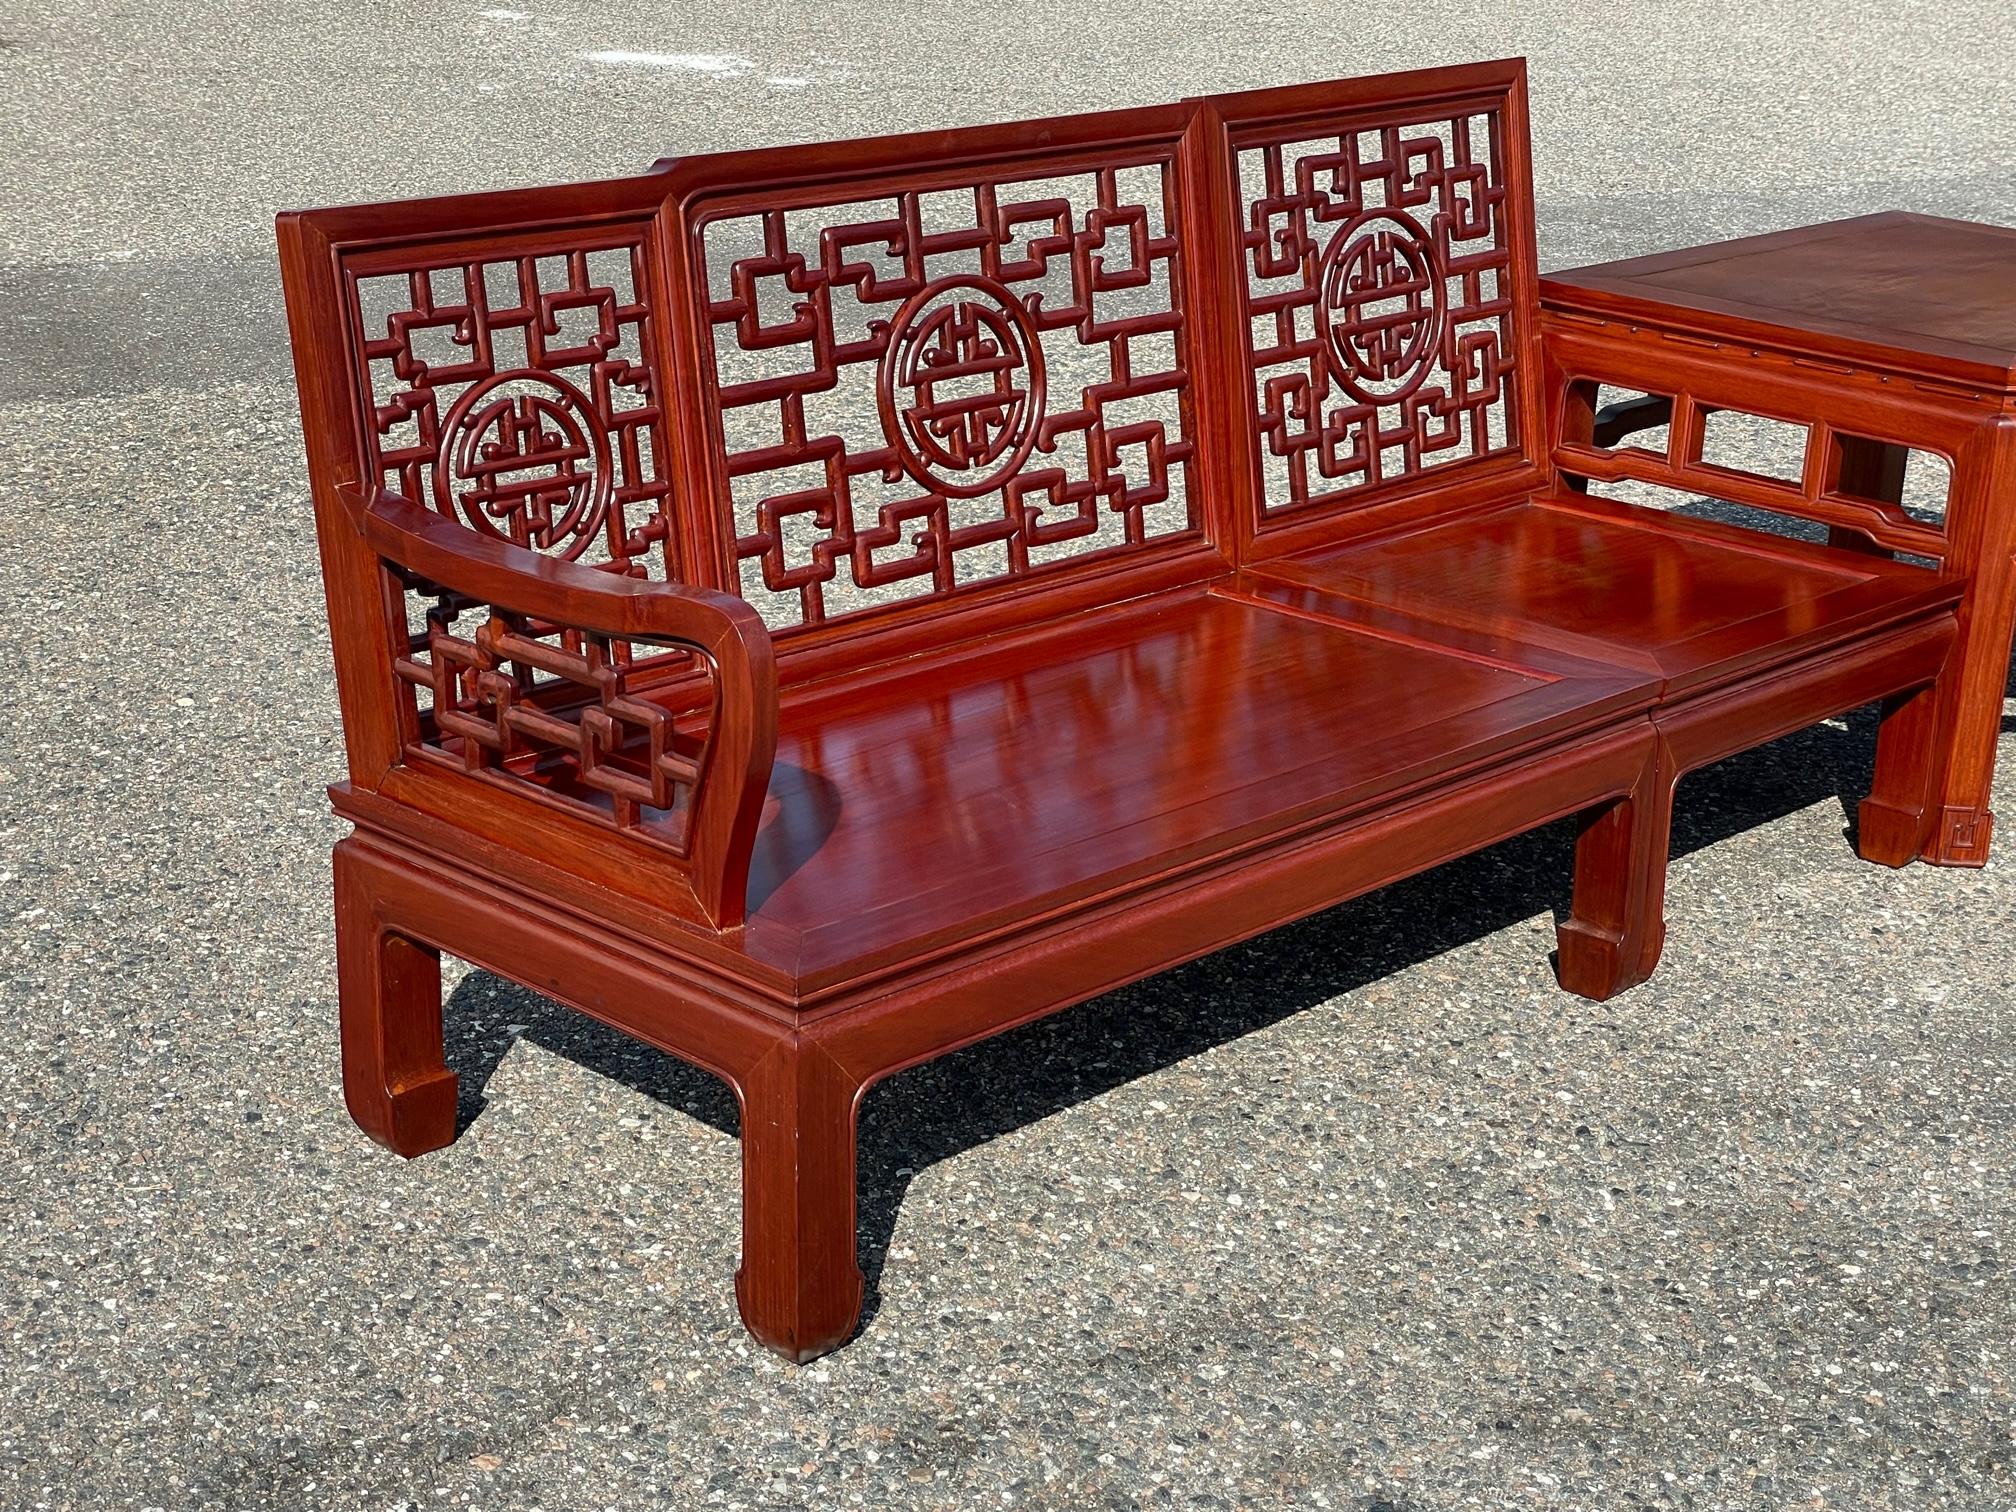 Extra large rosewood sectional by George Zee features hand carved chinoiserie style fretwork and a matching corner table. Can be configured in several different ways. Purchased new in the mid 1960s by the previous owner. Good condition with minor